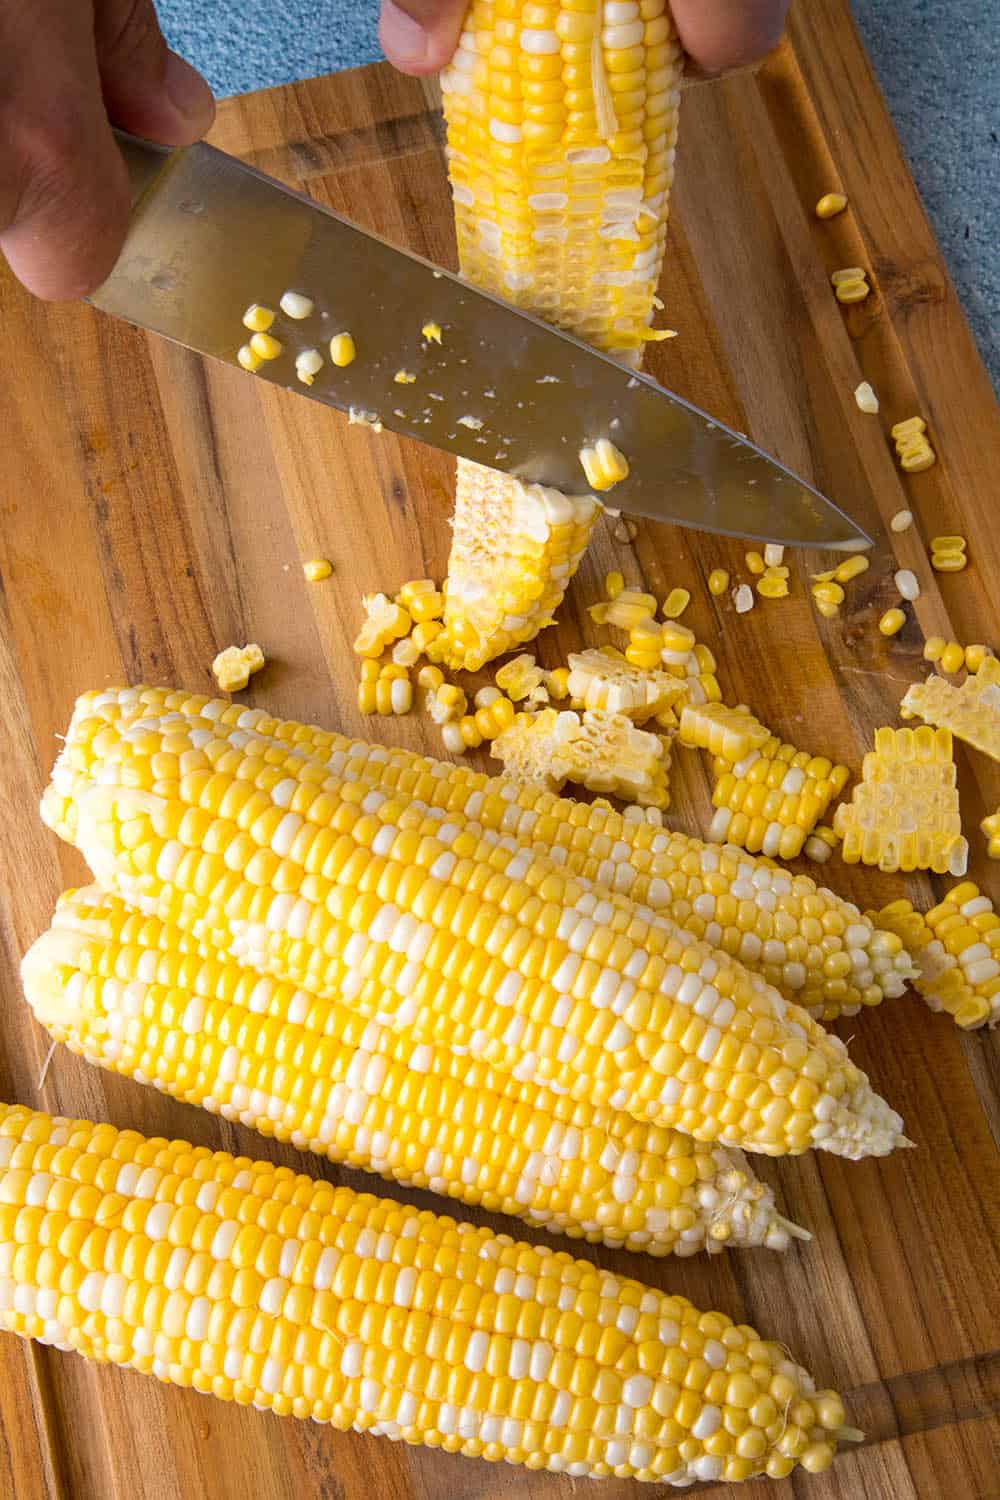 Mike slicing corn from the cob to make Esquites (Mexican Corn Salad)